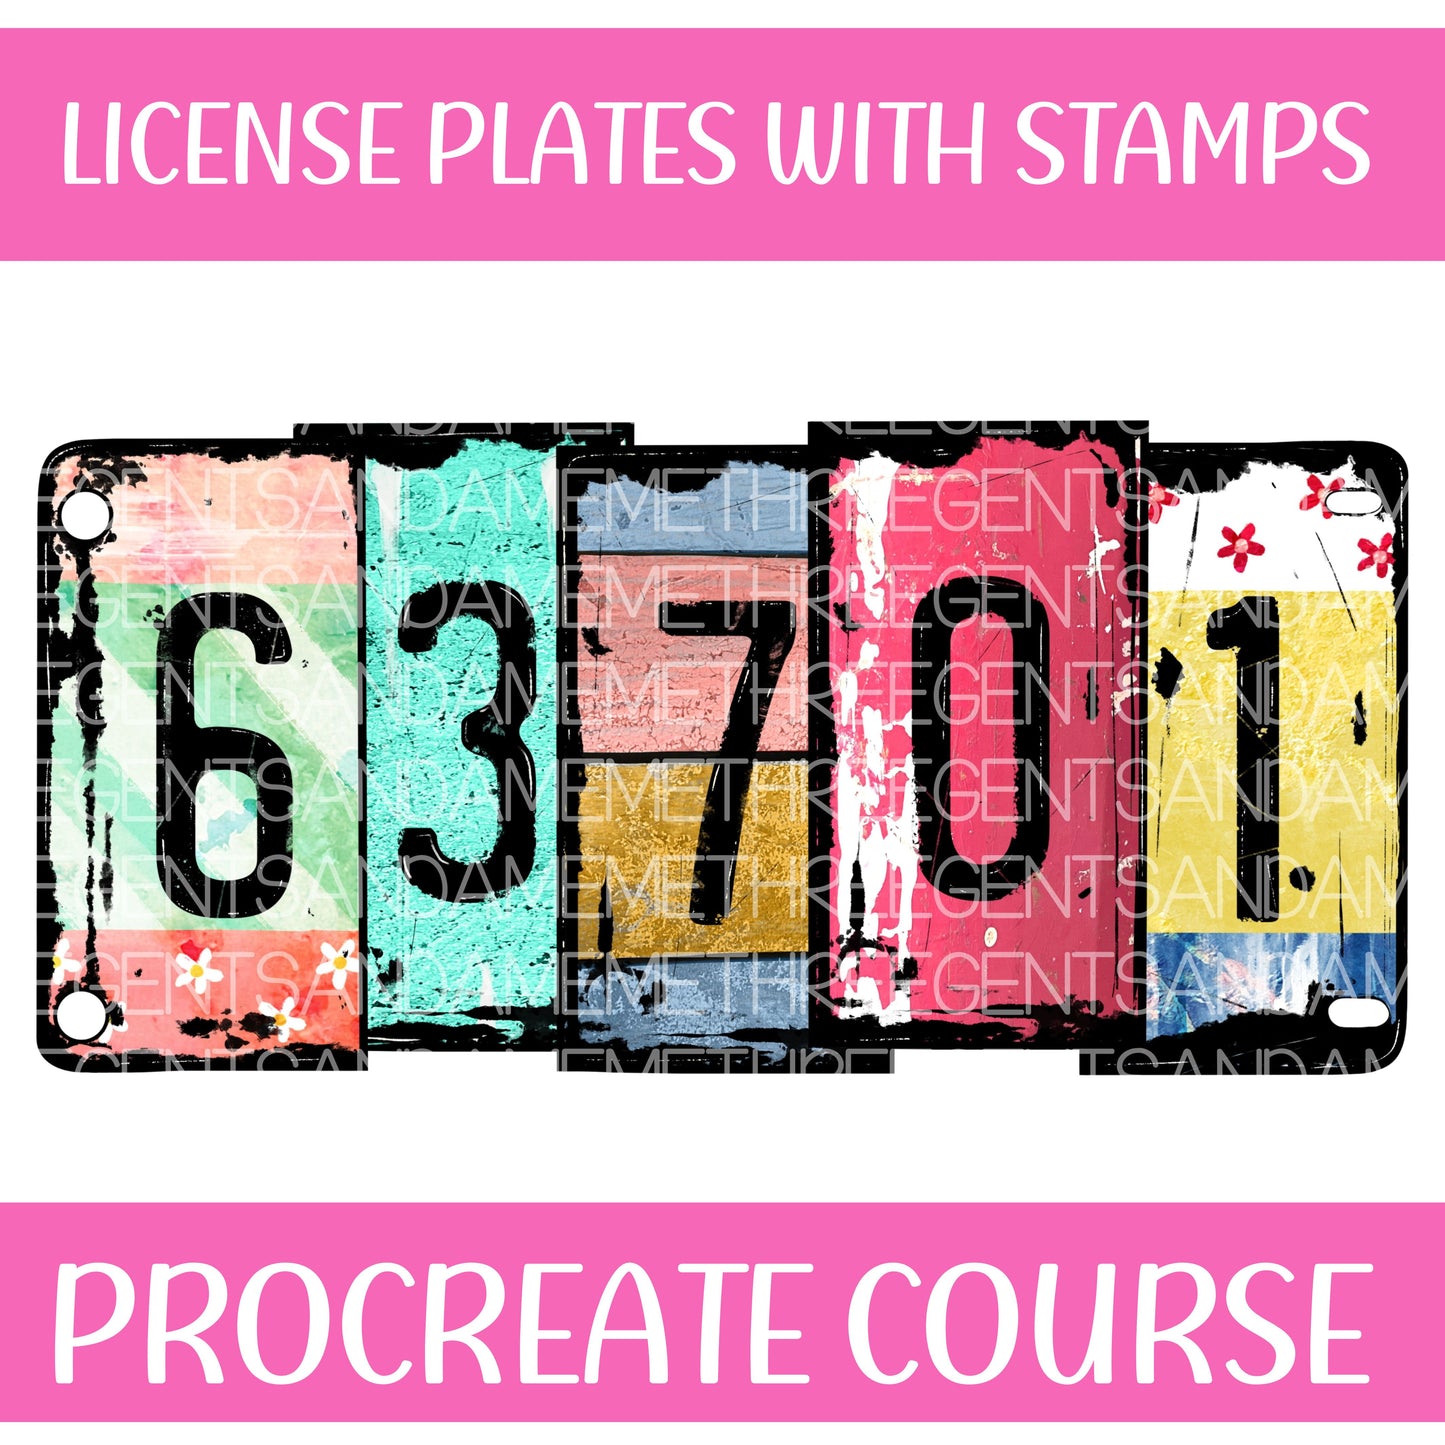 LICENSE PLATES WITH STAMPS PROCREATE COURSE